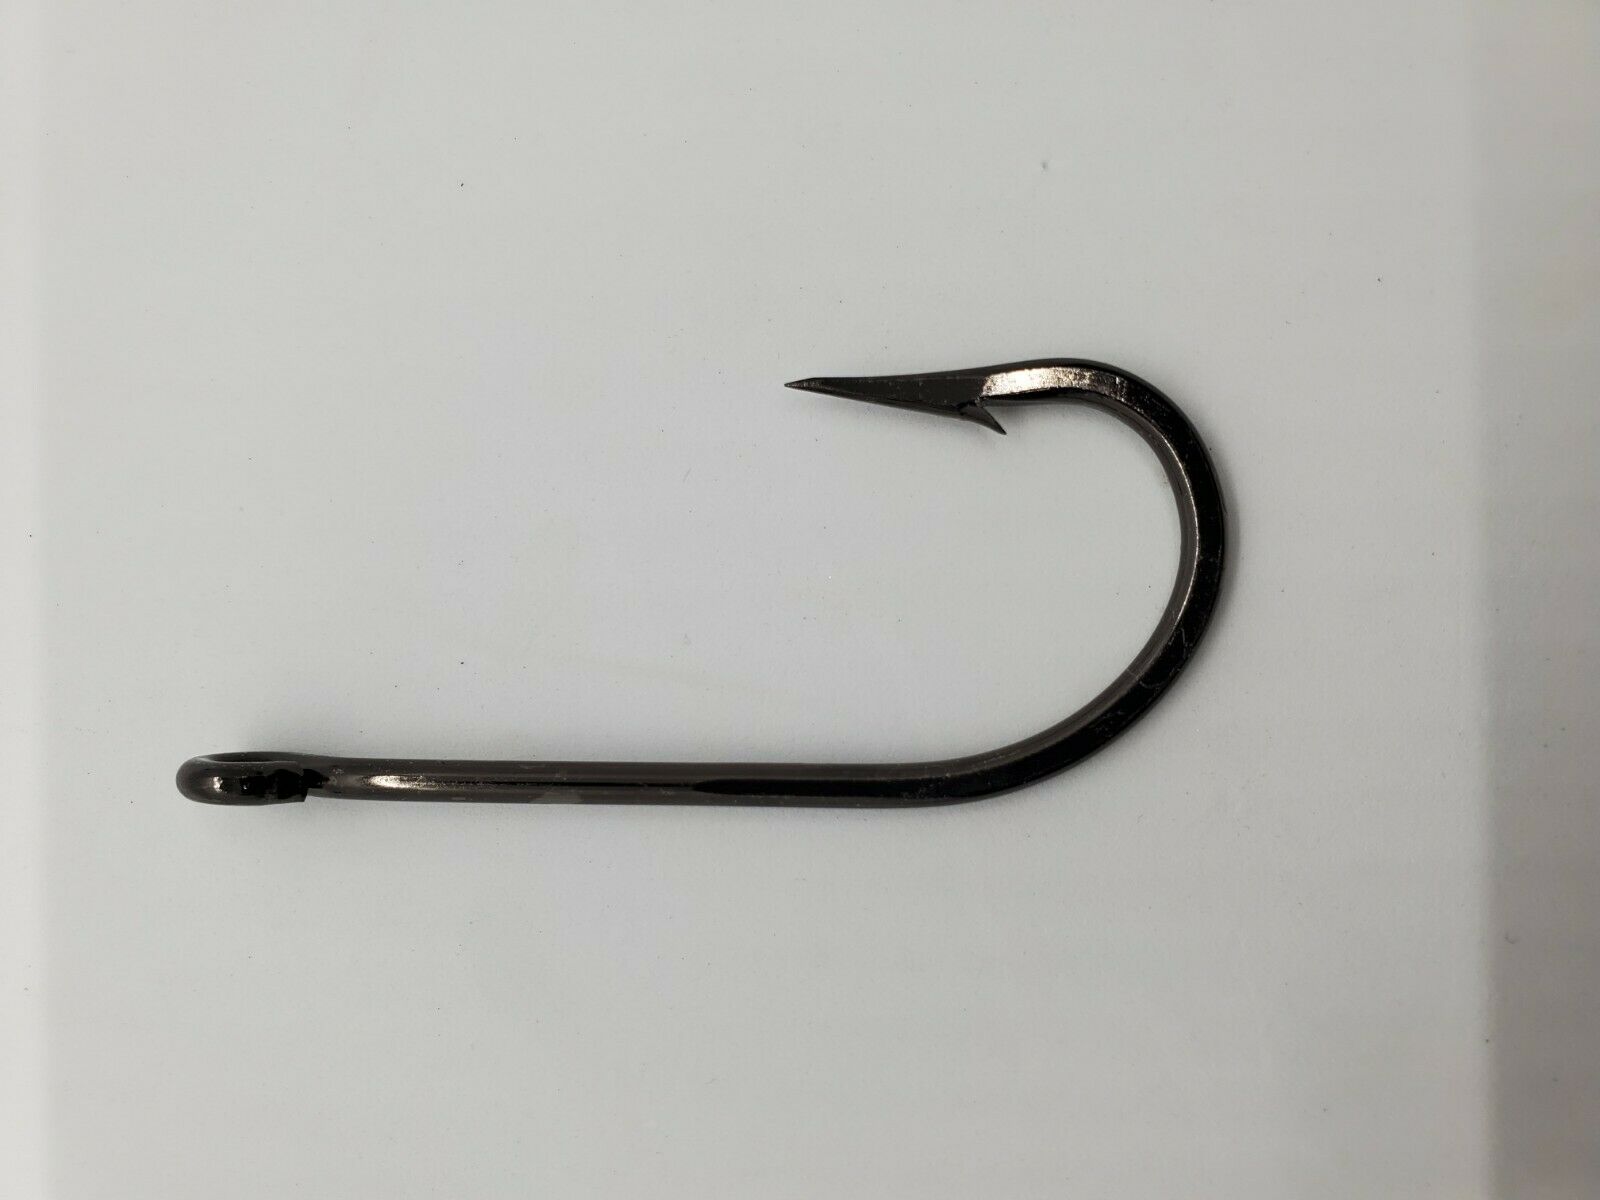 Lot of 263 Mustad Hooks, Size 6 & 7 Classic O'shaughnessy Forged